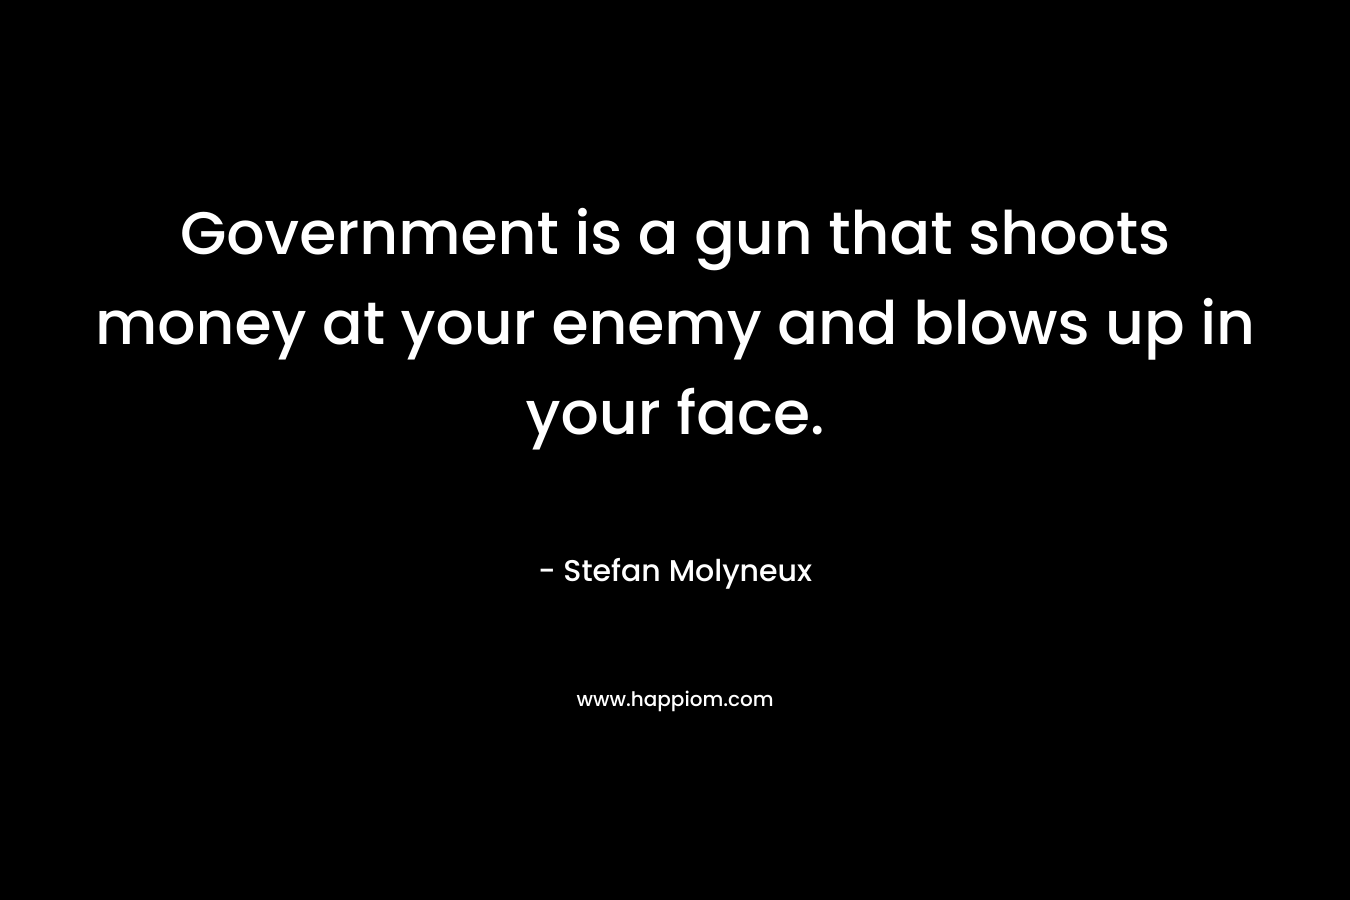 Government is a gun that shoots money at your enemy and blows up in your face. – Stefan Molyneux